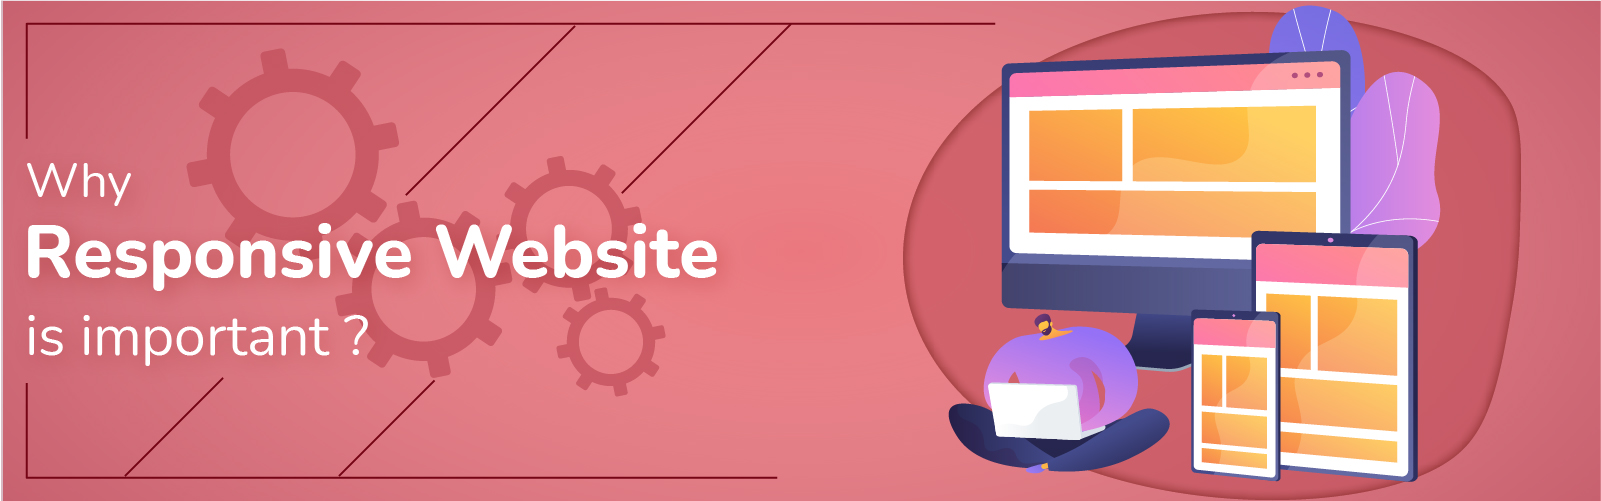 Why Responsive Website is Important?